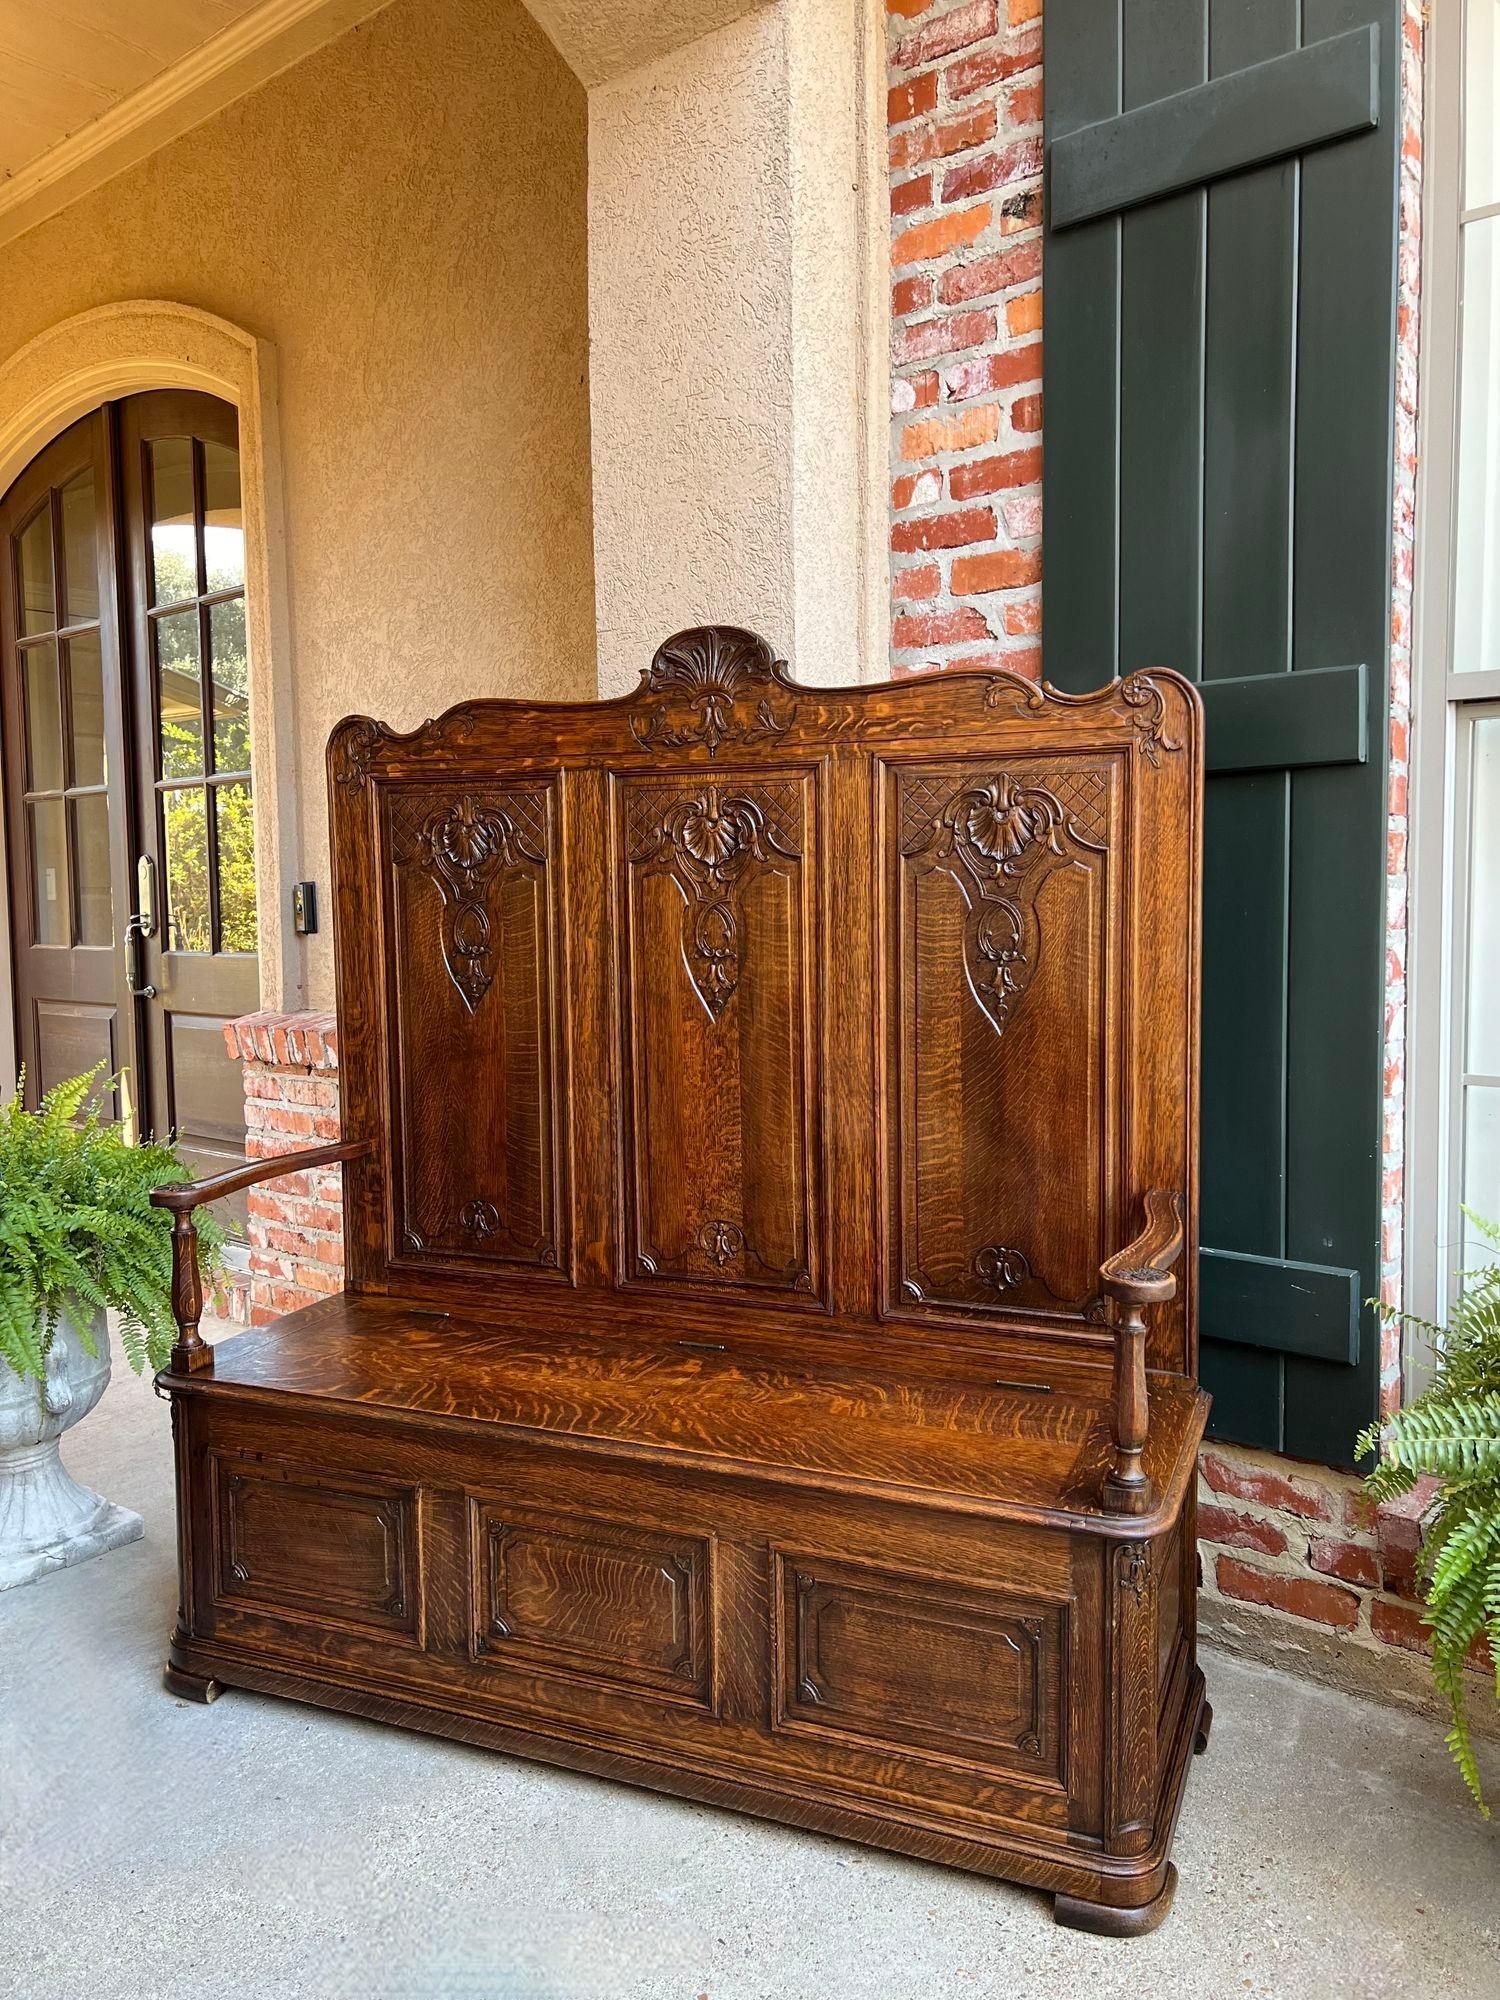 French Provincial TALL Antique French Louis XV Bench Settle Pew Carved Tiger Oak Chest Foyer Entry For Sale